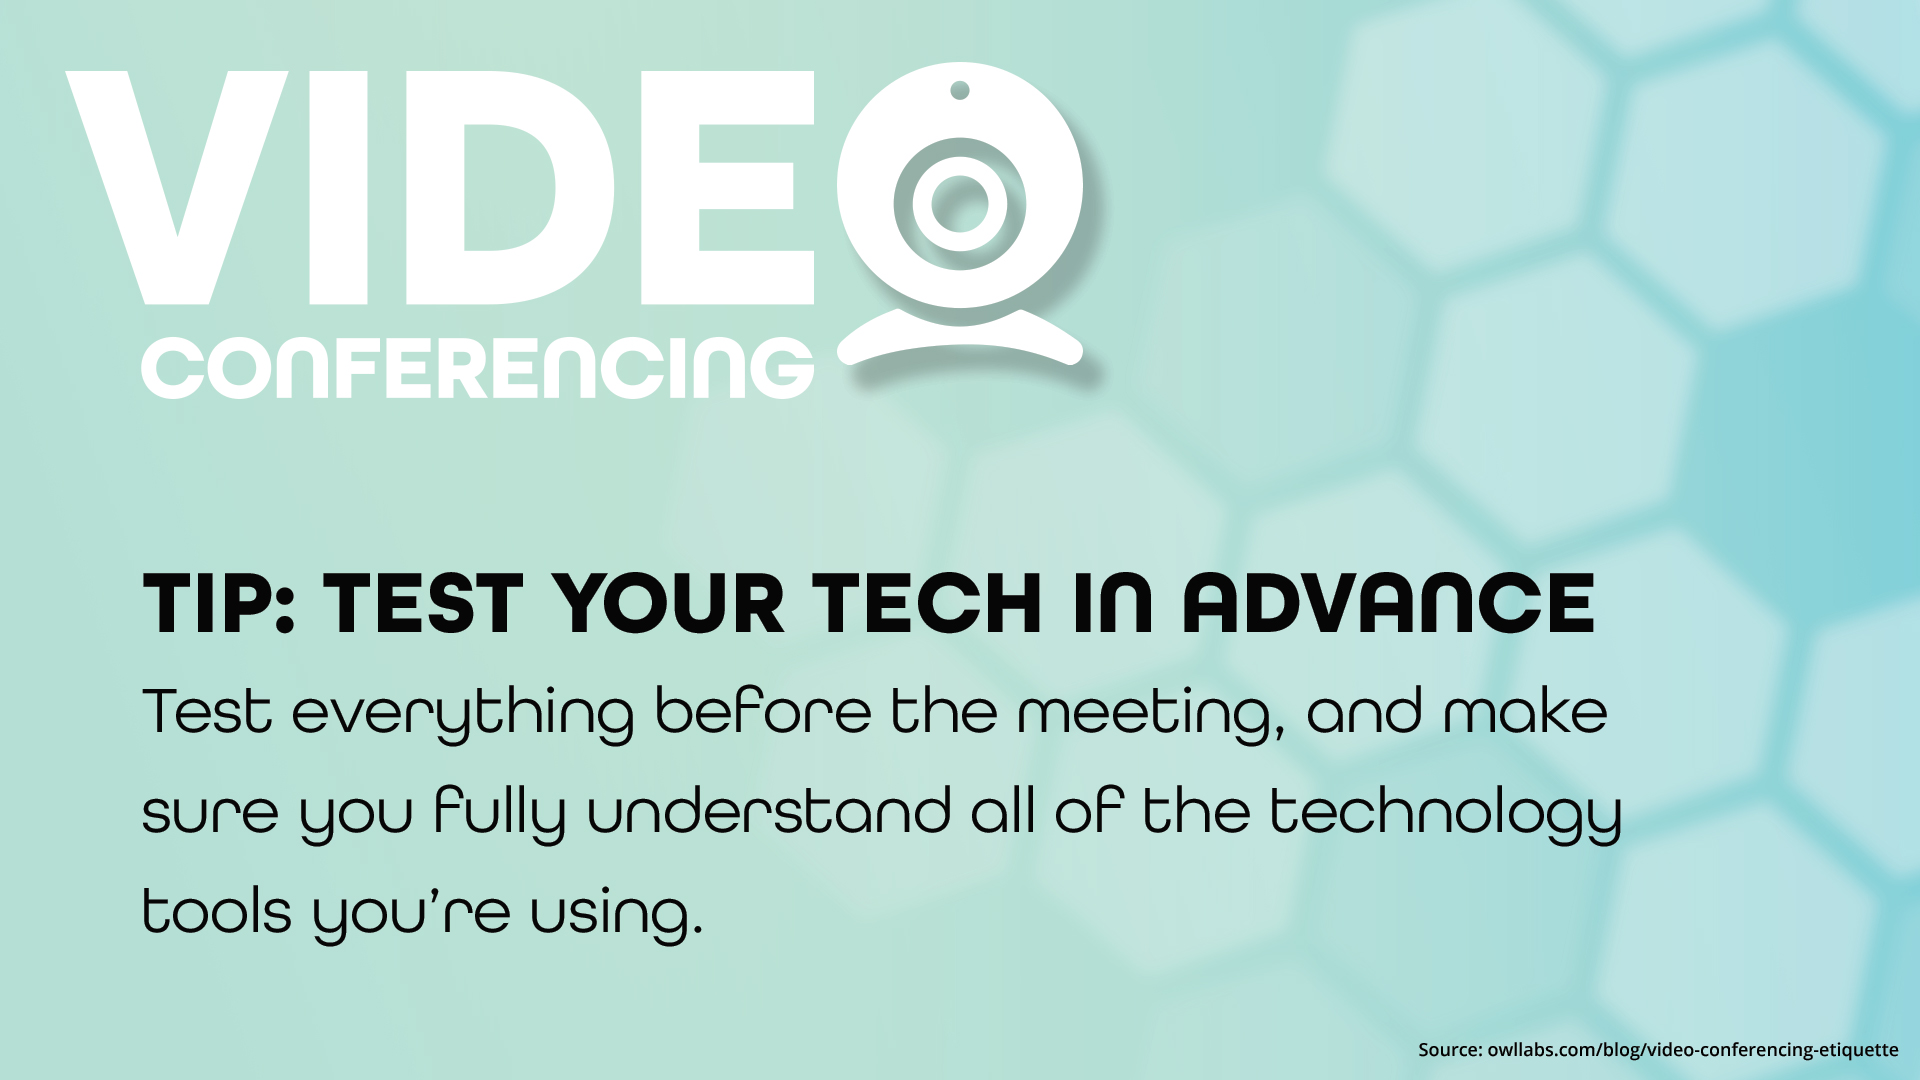 Free Graphic | Video Conferencing Tips | Test Tech in Advance